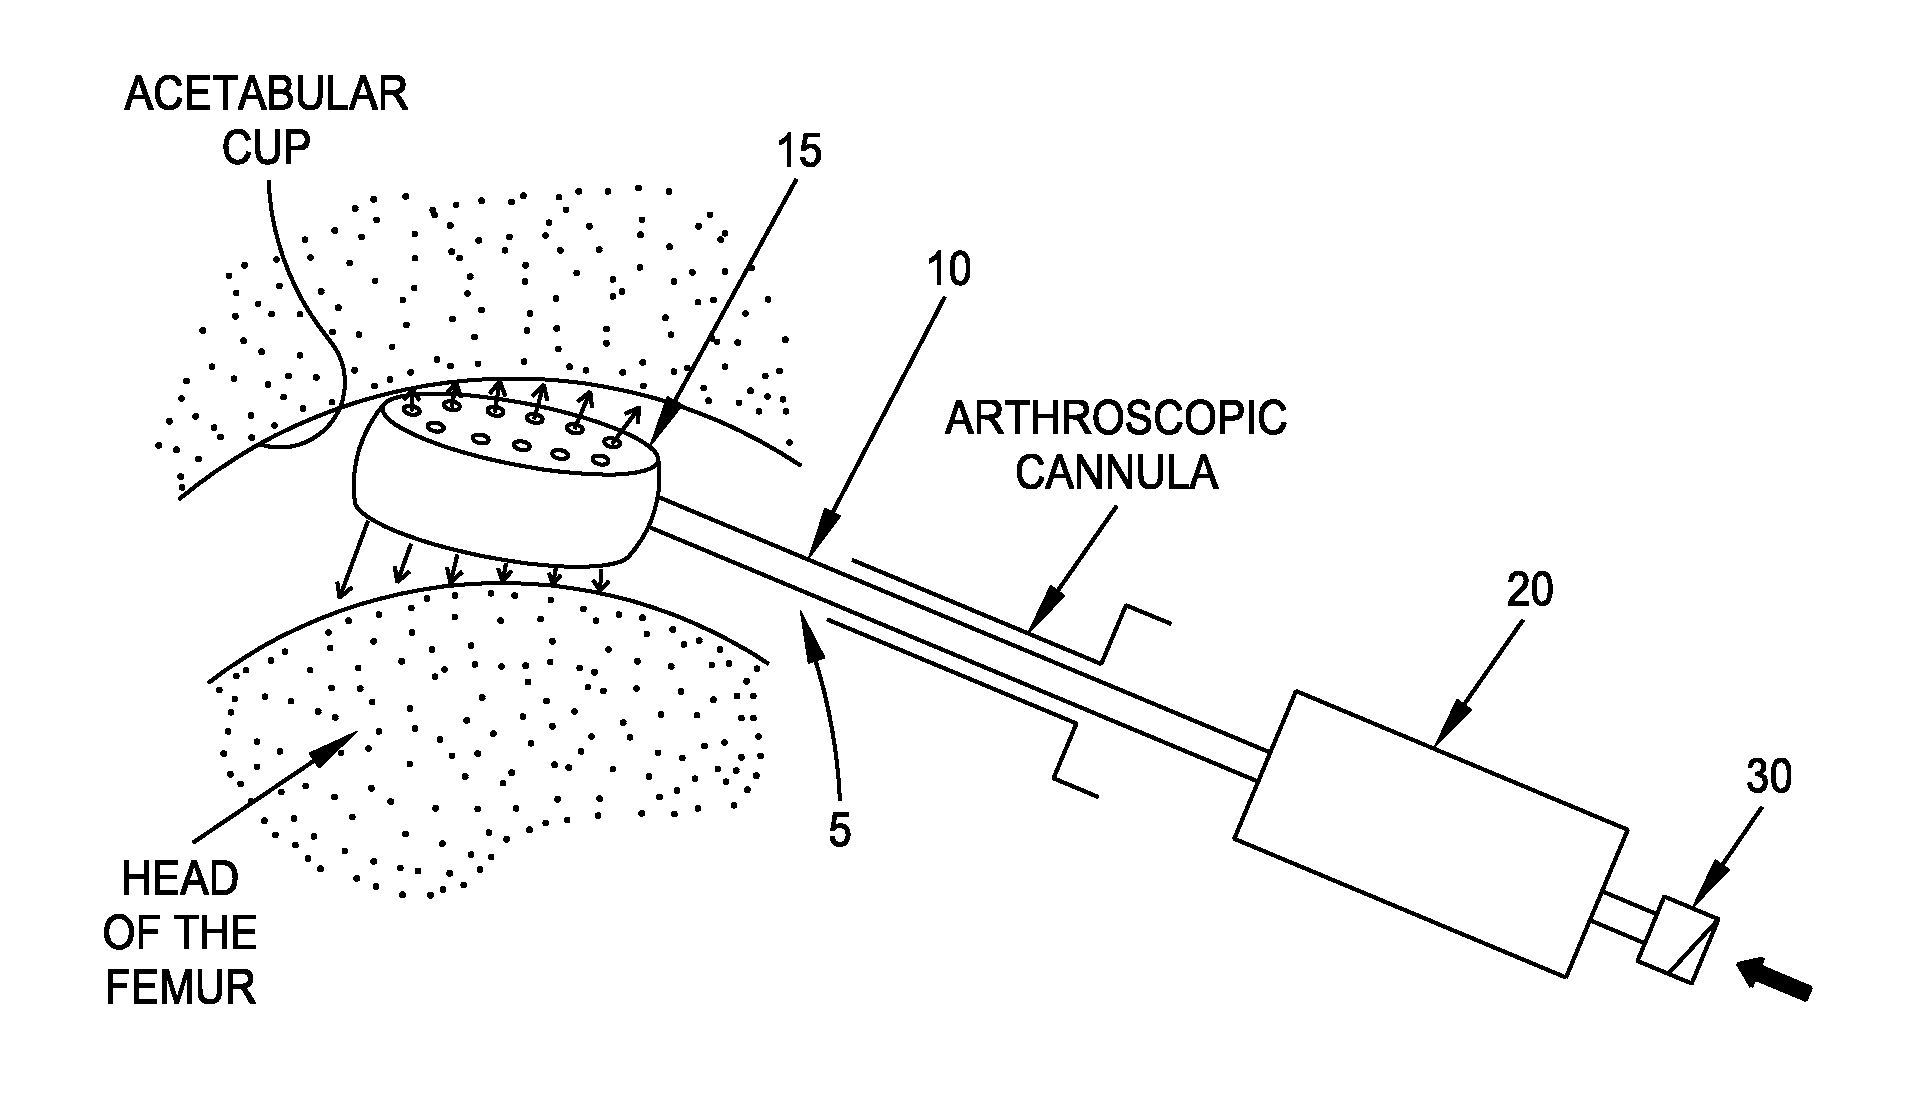 Method and apparatus for distracting a joint, including the provision and use of a novel fluid joint spacer